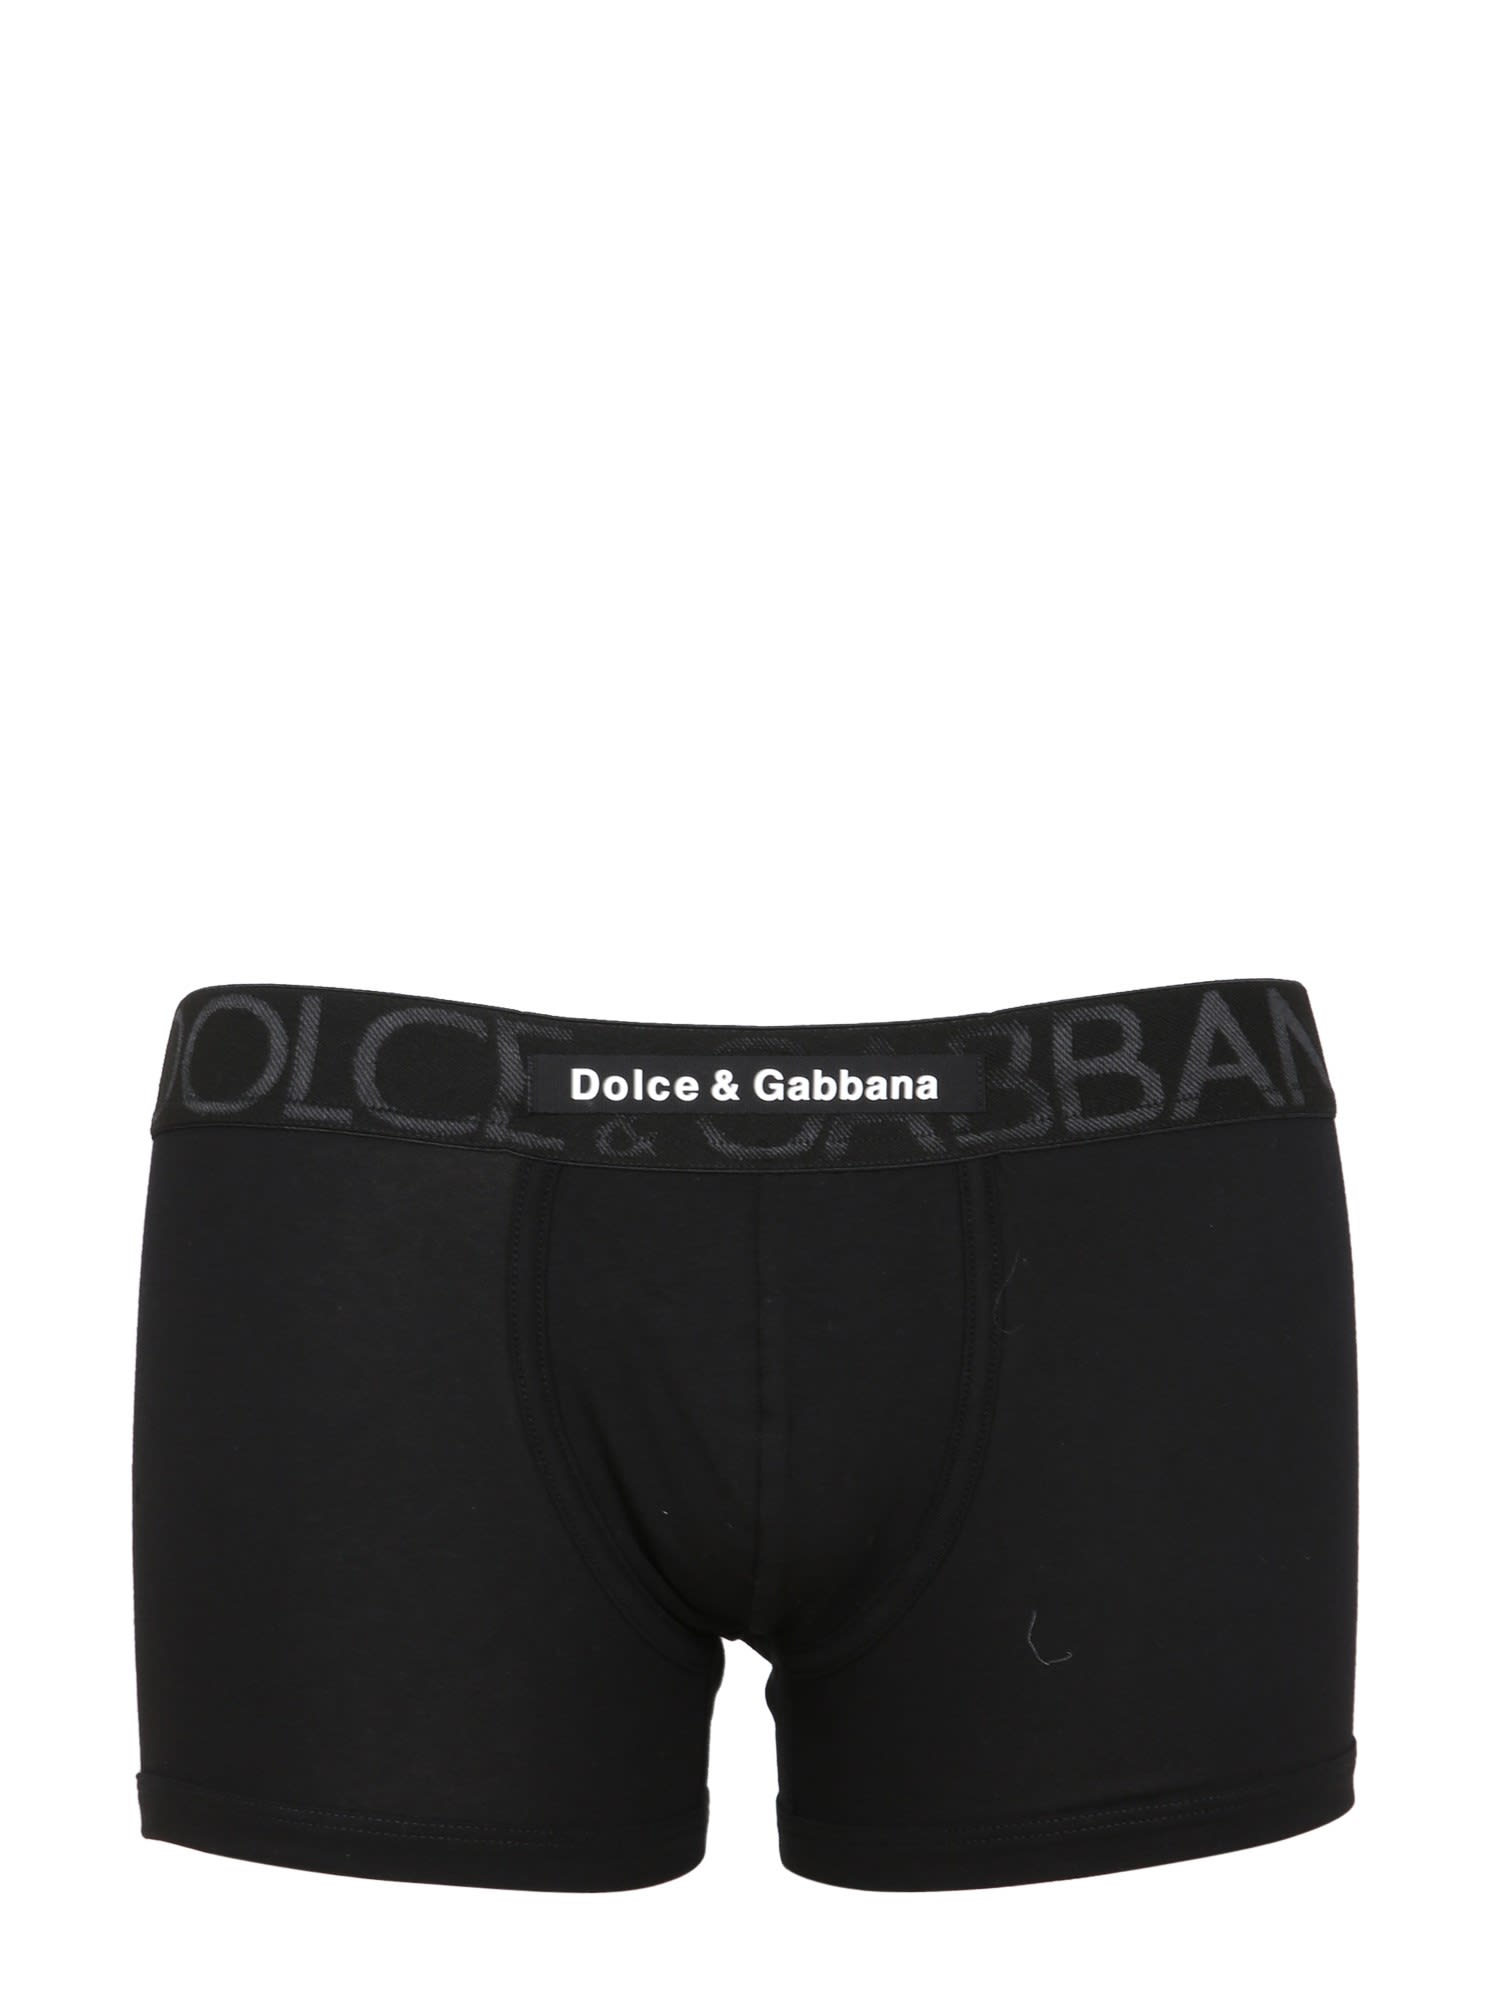 DOLCE & GABBANA BOXERS WITH LOGO BAND,M4D31J OUAIGN0000